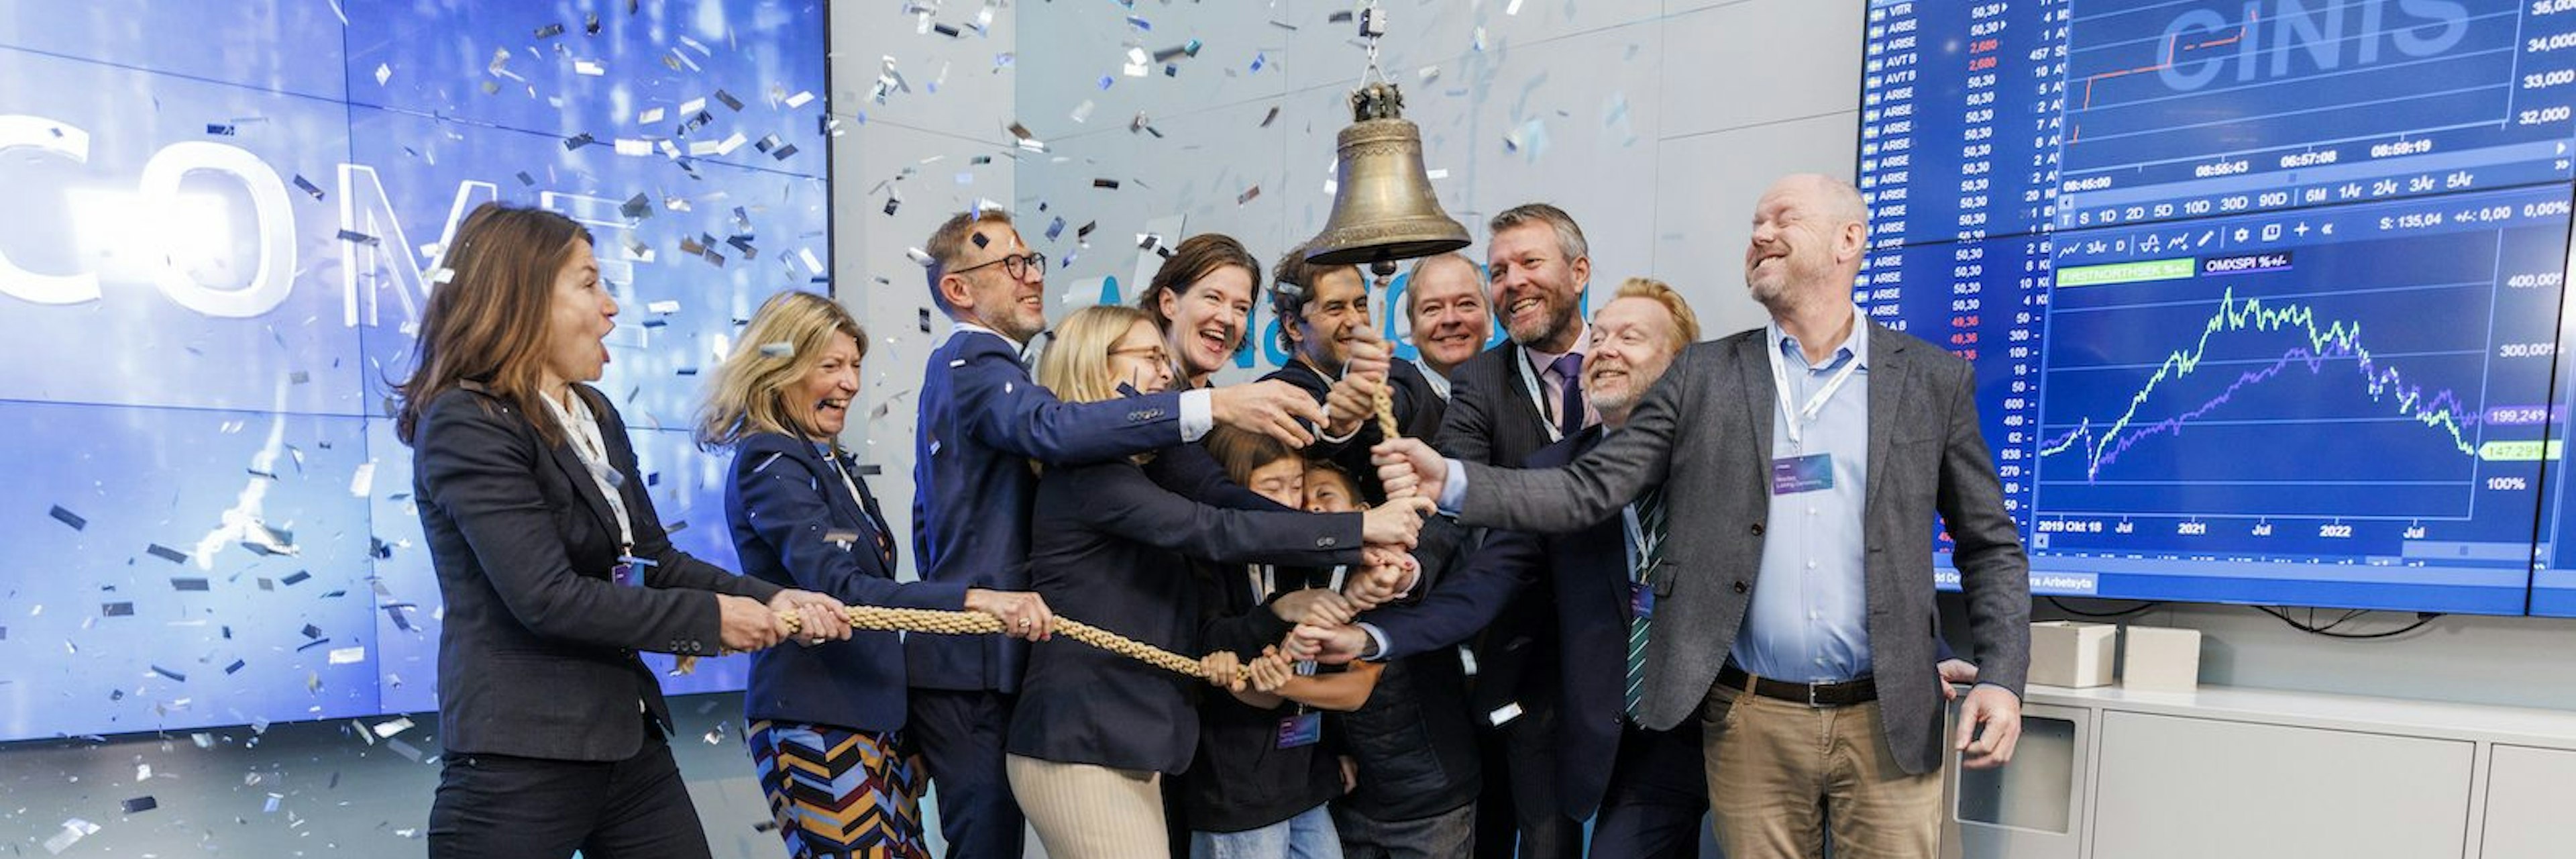 Picture of the team of Cinis Fertilizer ringing the bell at the stock market introduction.